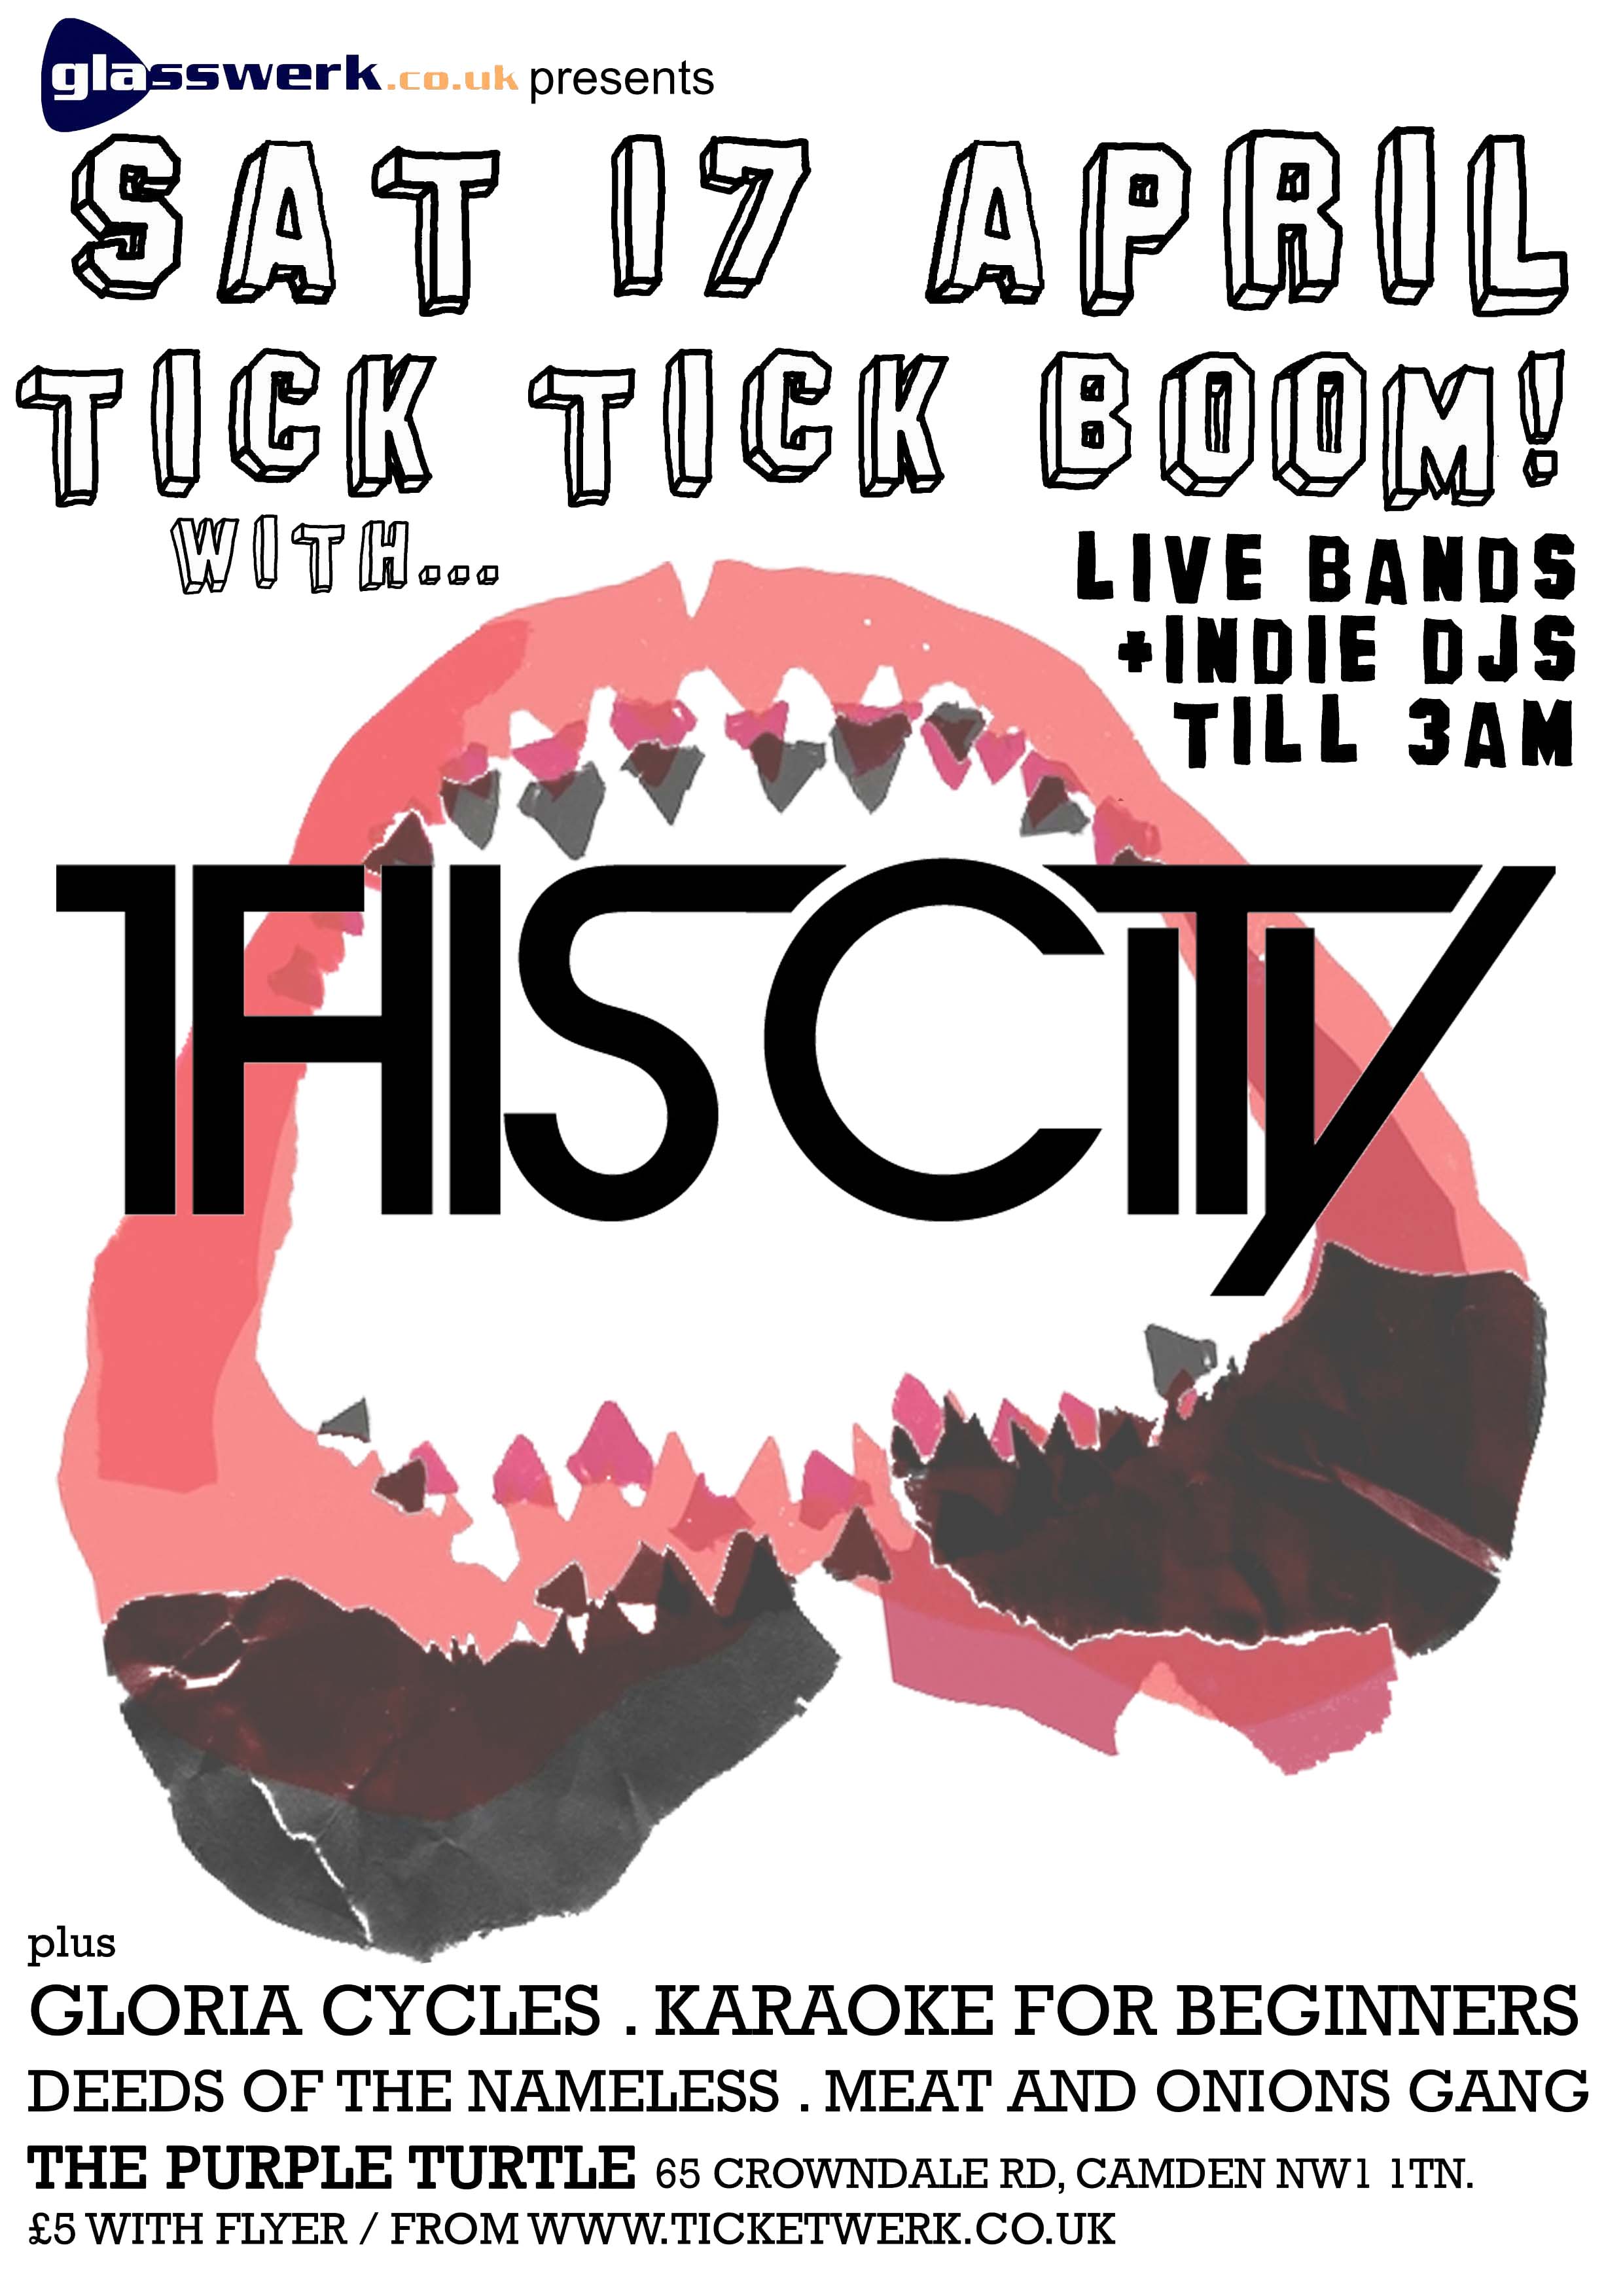 Tick Tick Boom! with This City